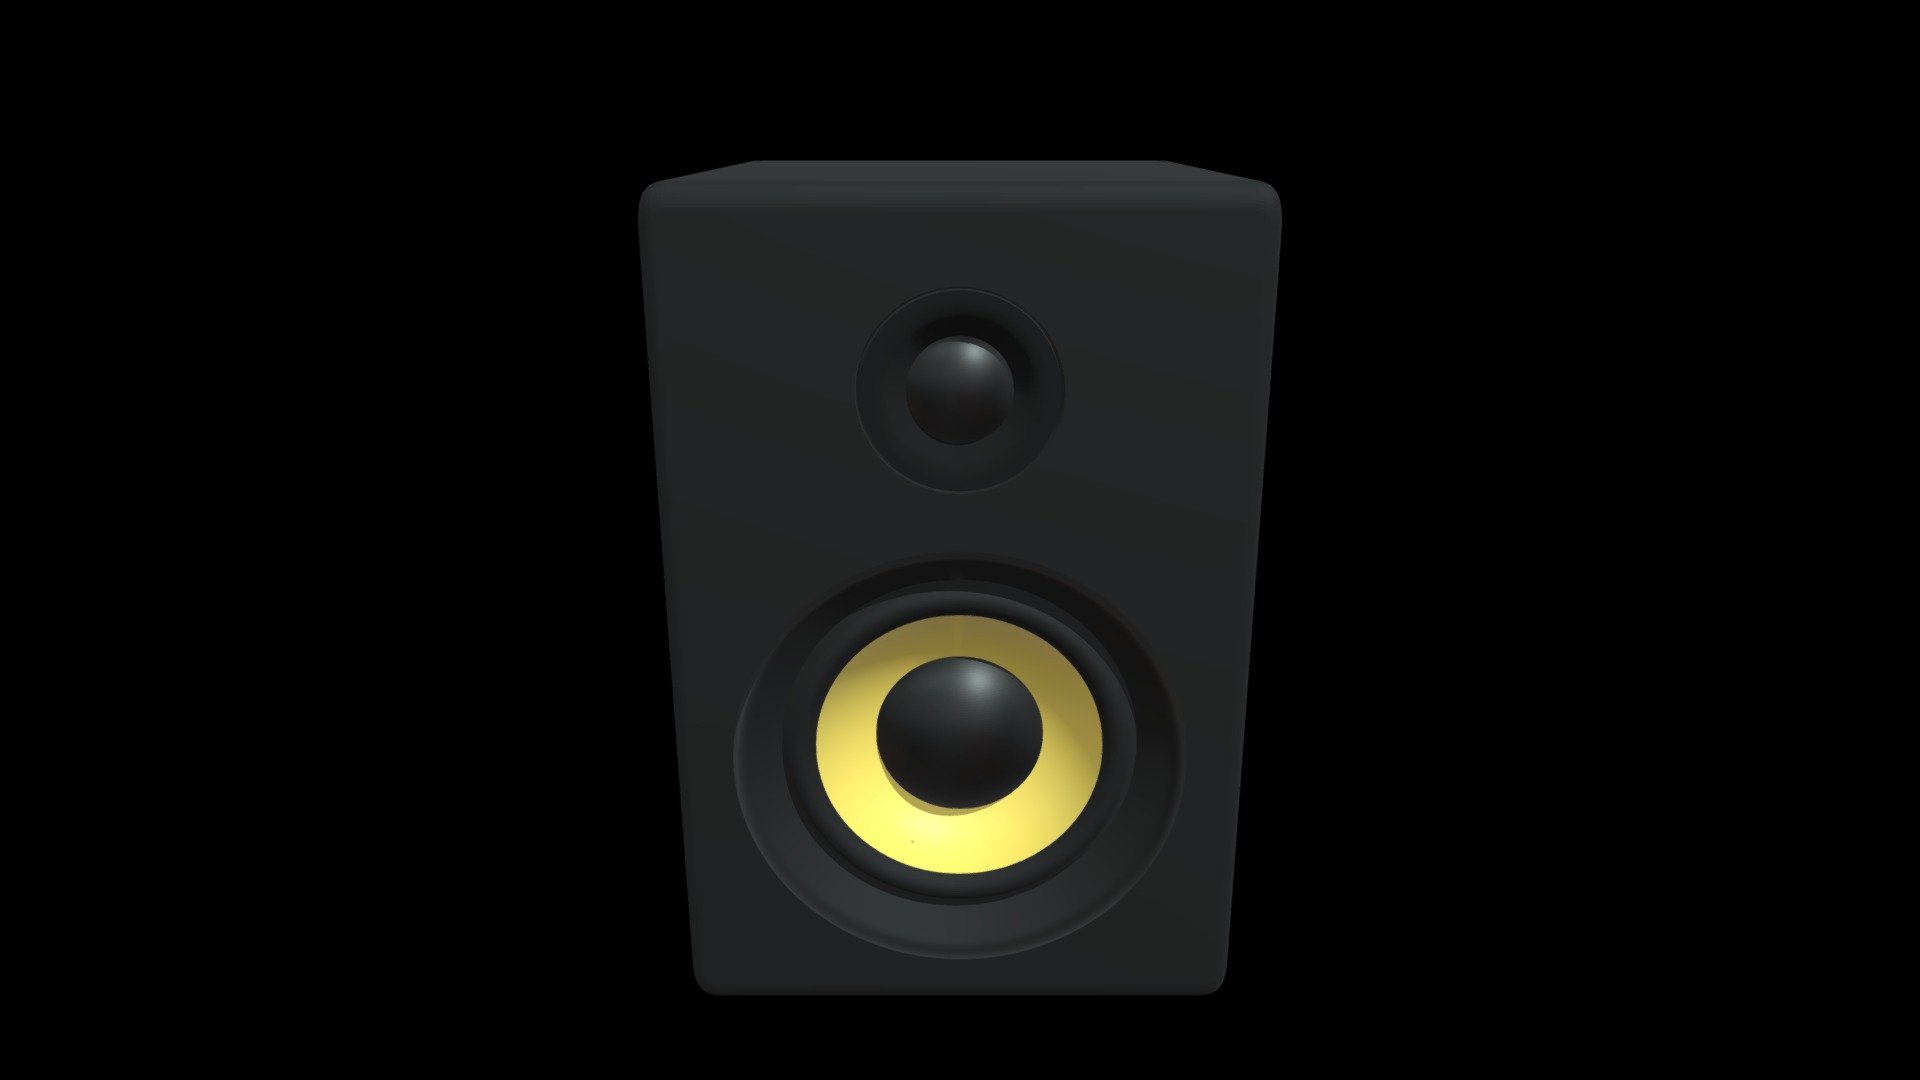 Studio monitor designed with Blender - Speaker / Audio Monitor YELLOW - 3D model by disqtible 3d model